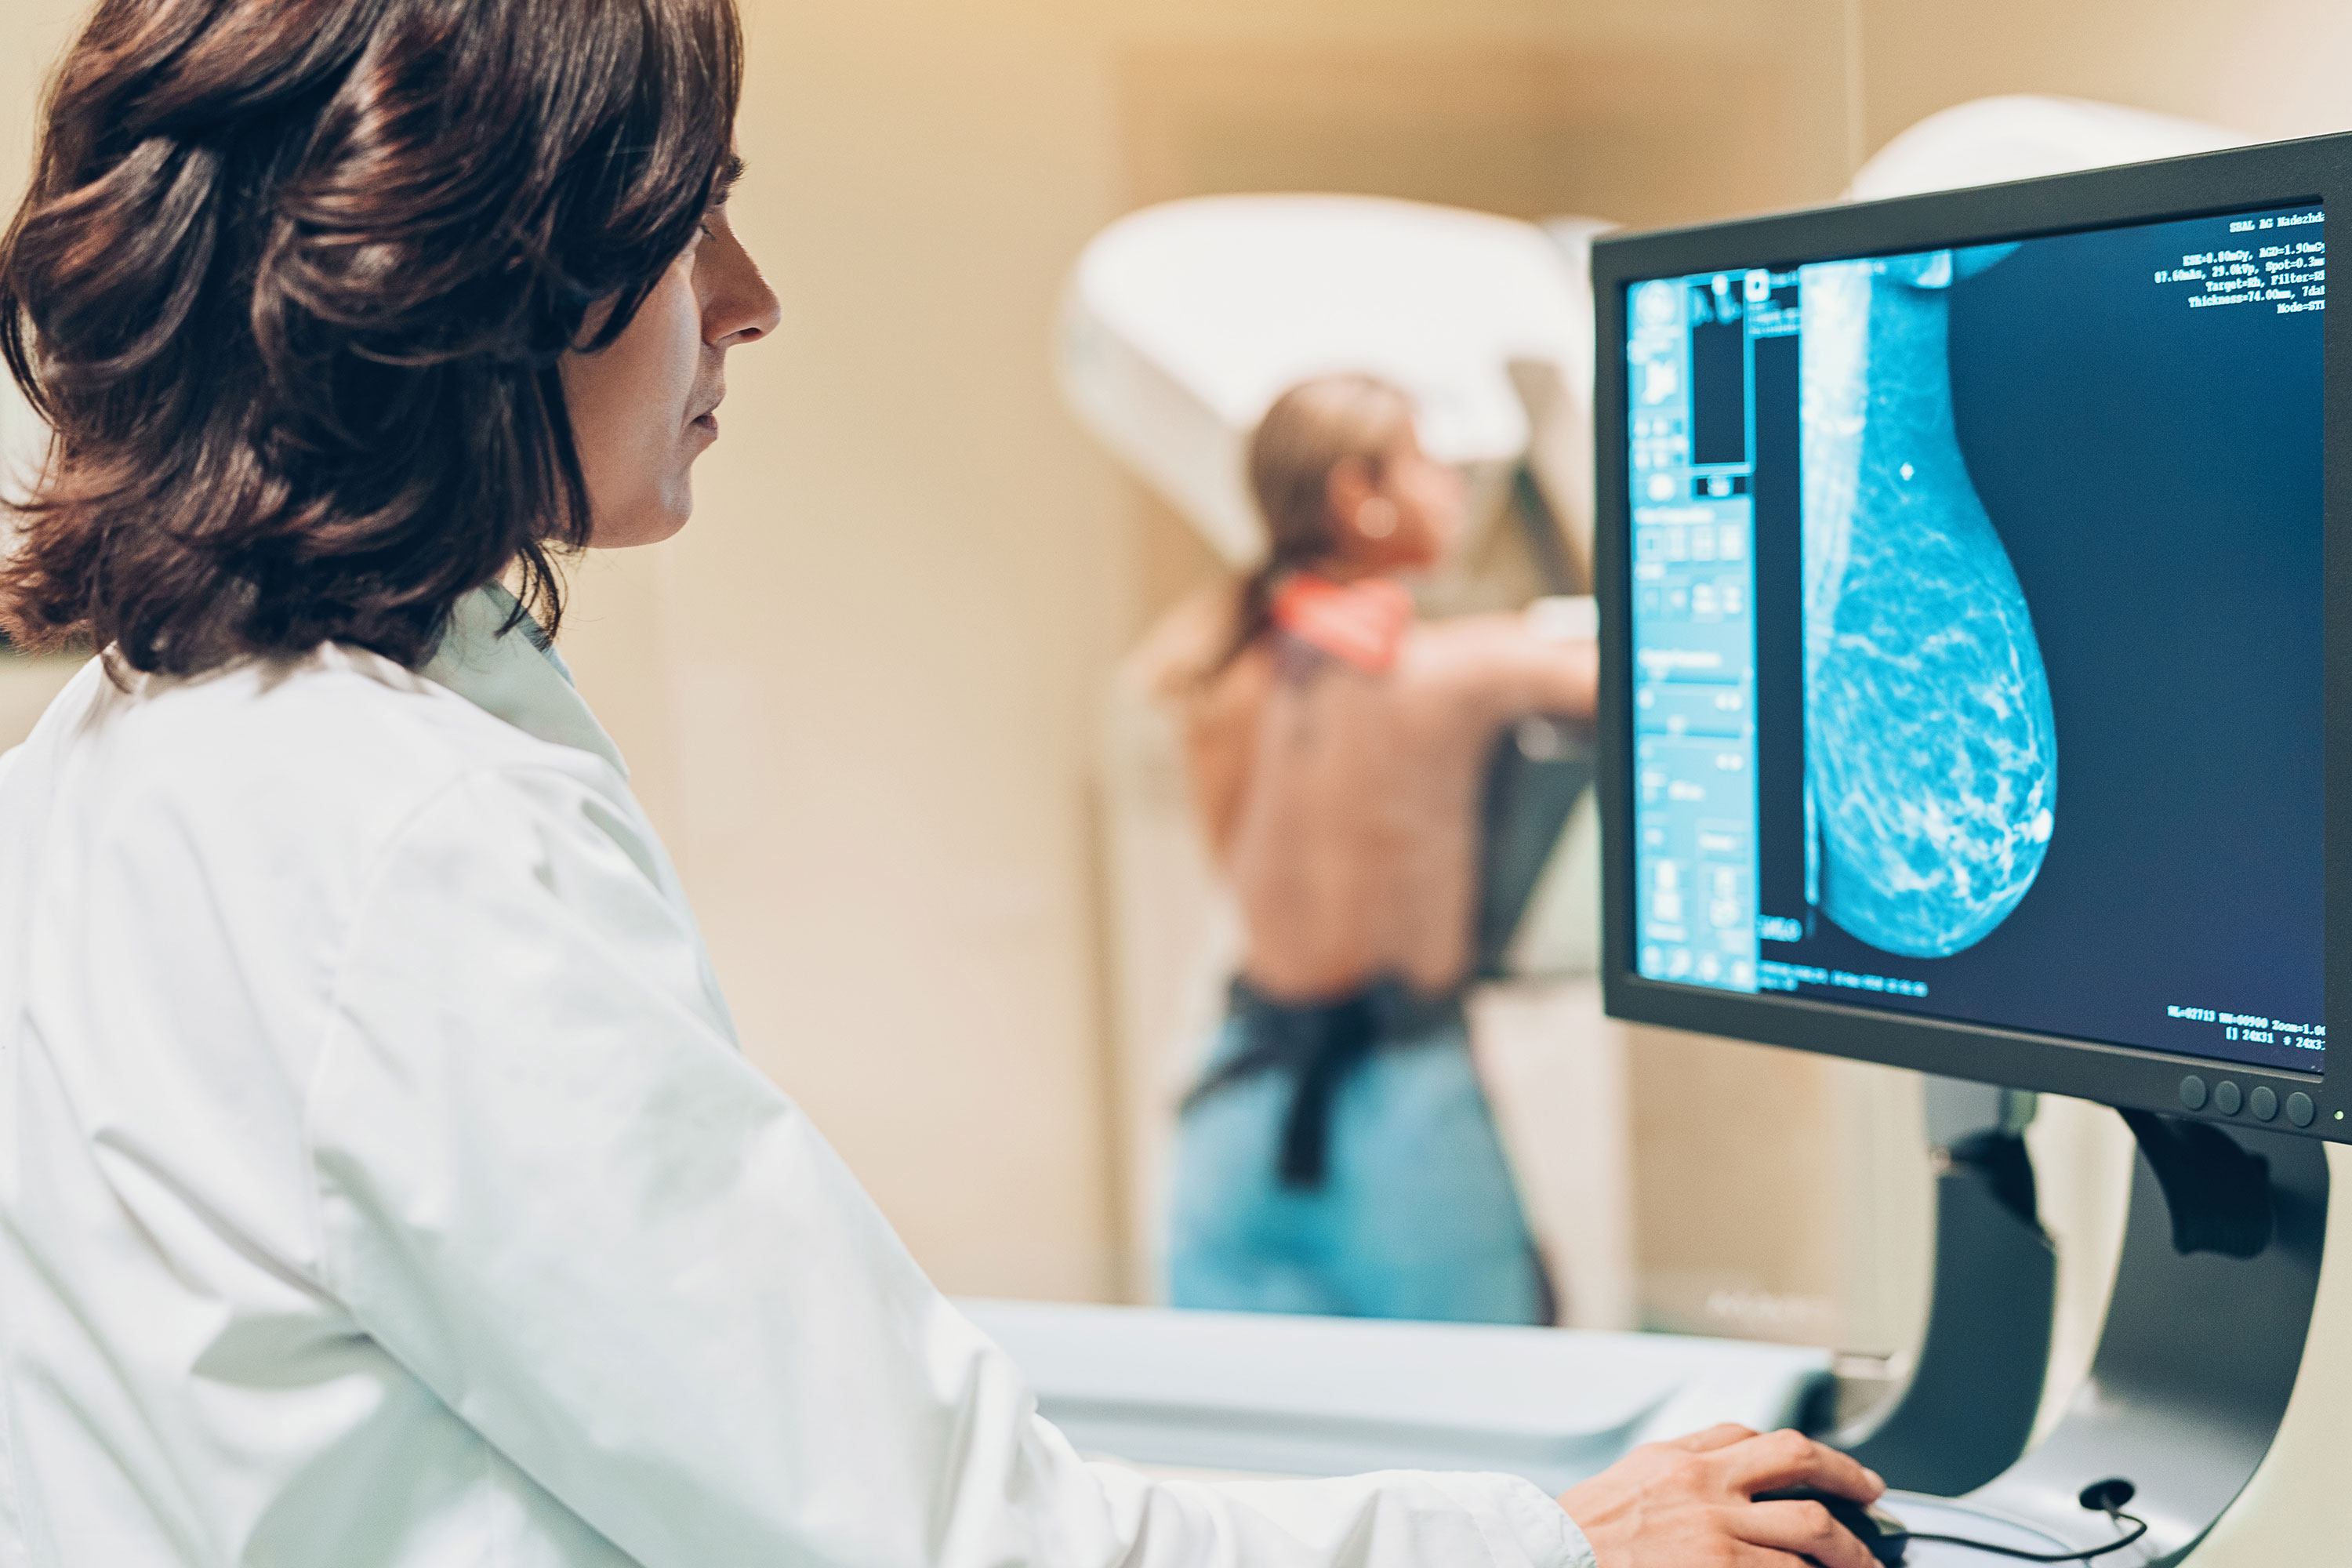 Can a Radiologist Diagnose Breast Cancer from Imaging Tests Alone?